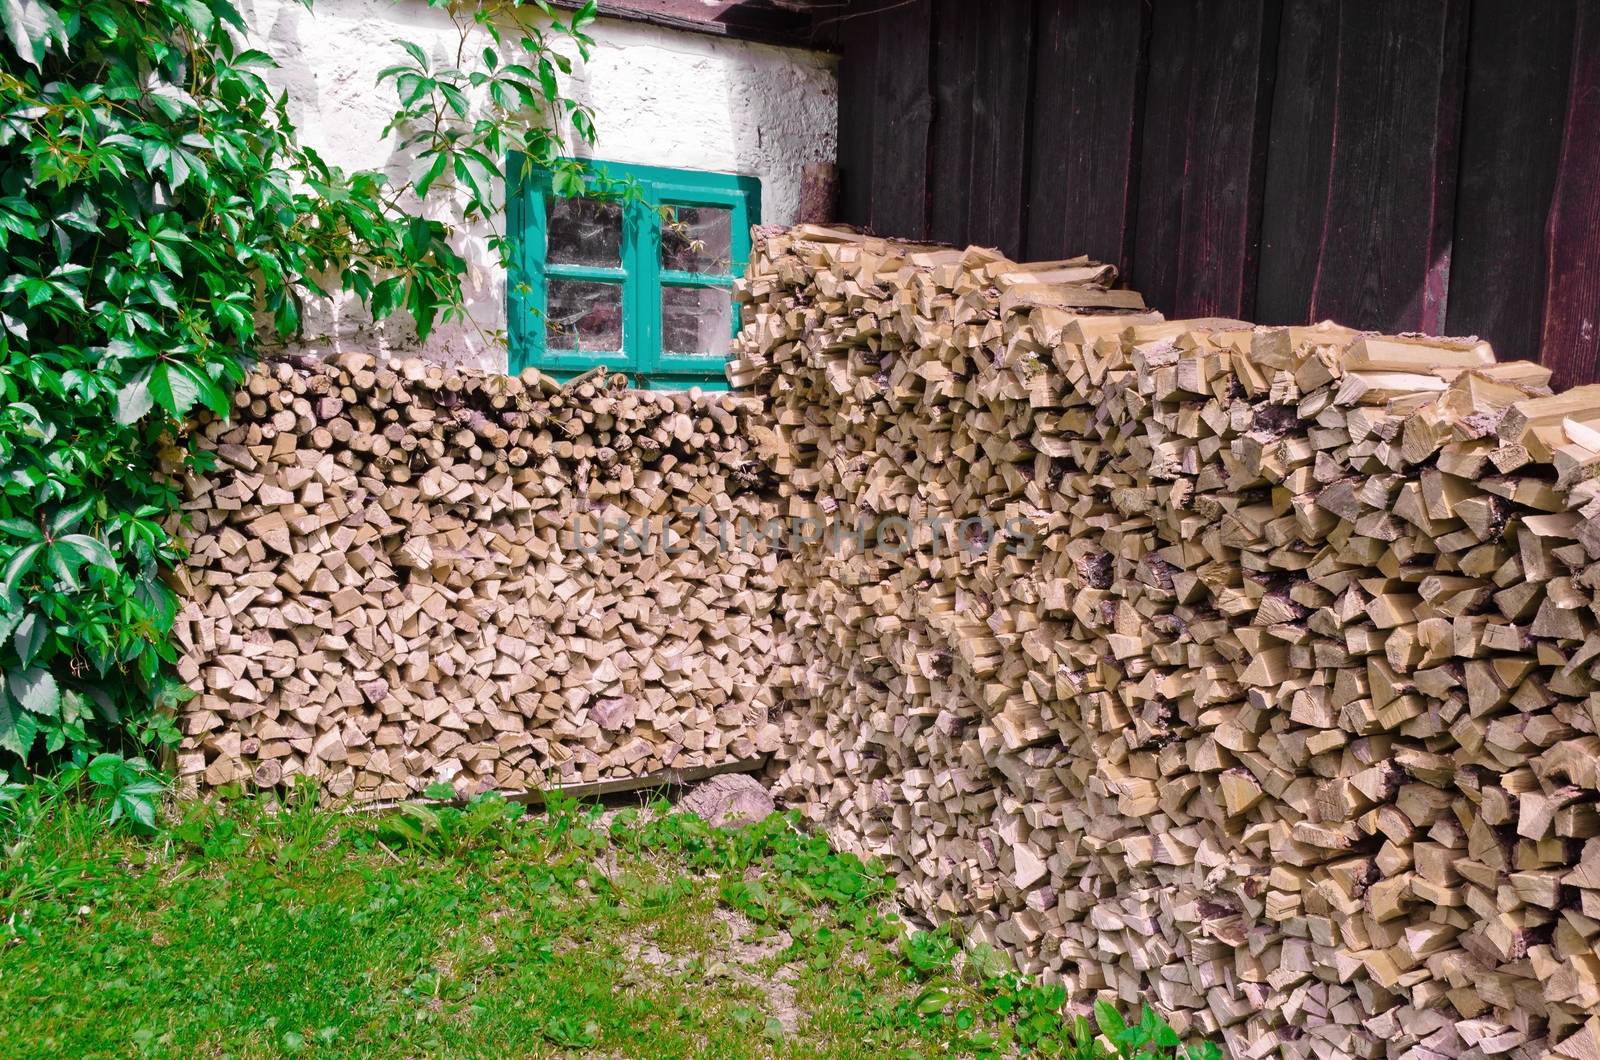 A pile of firewood under the window of country house